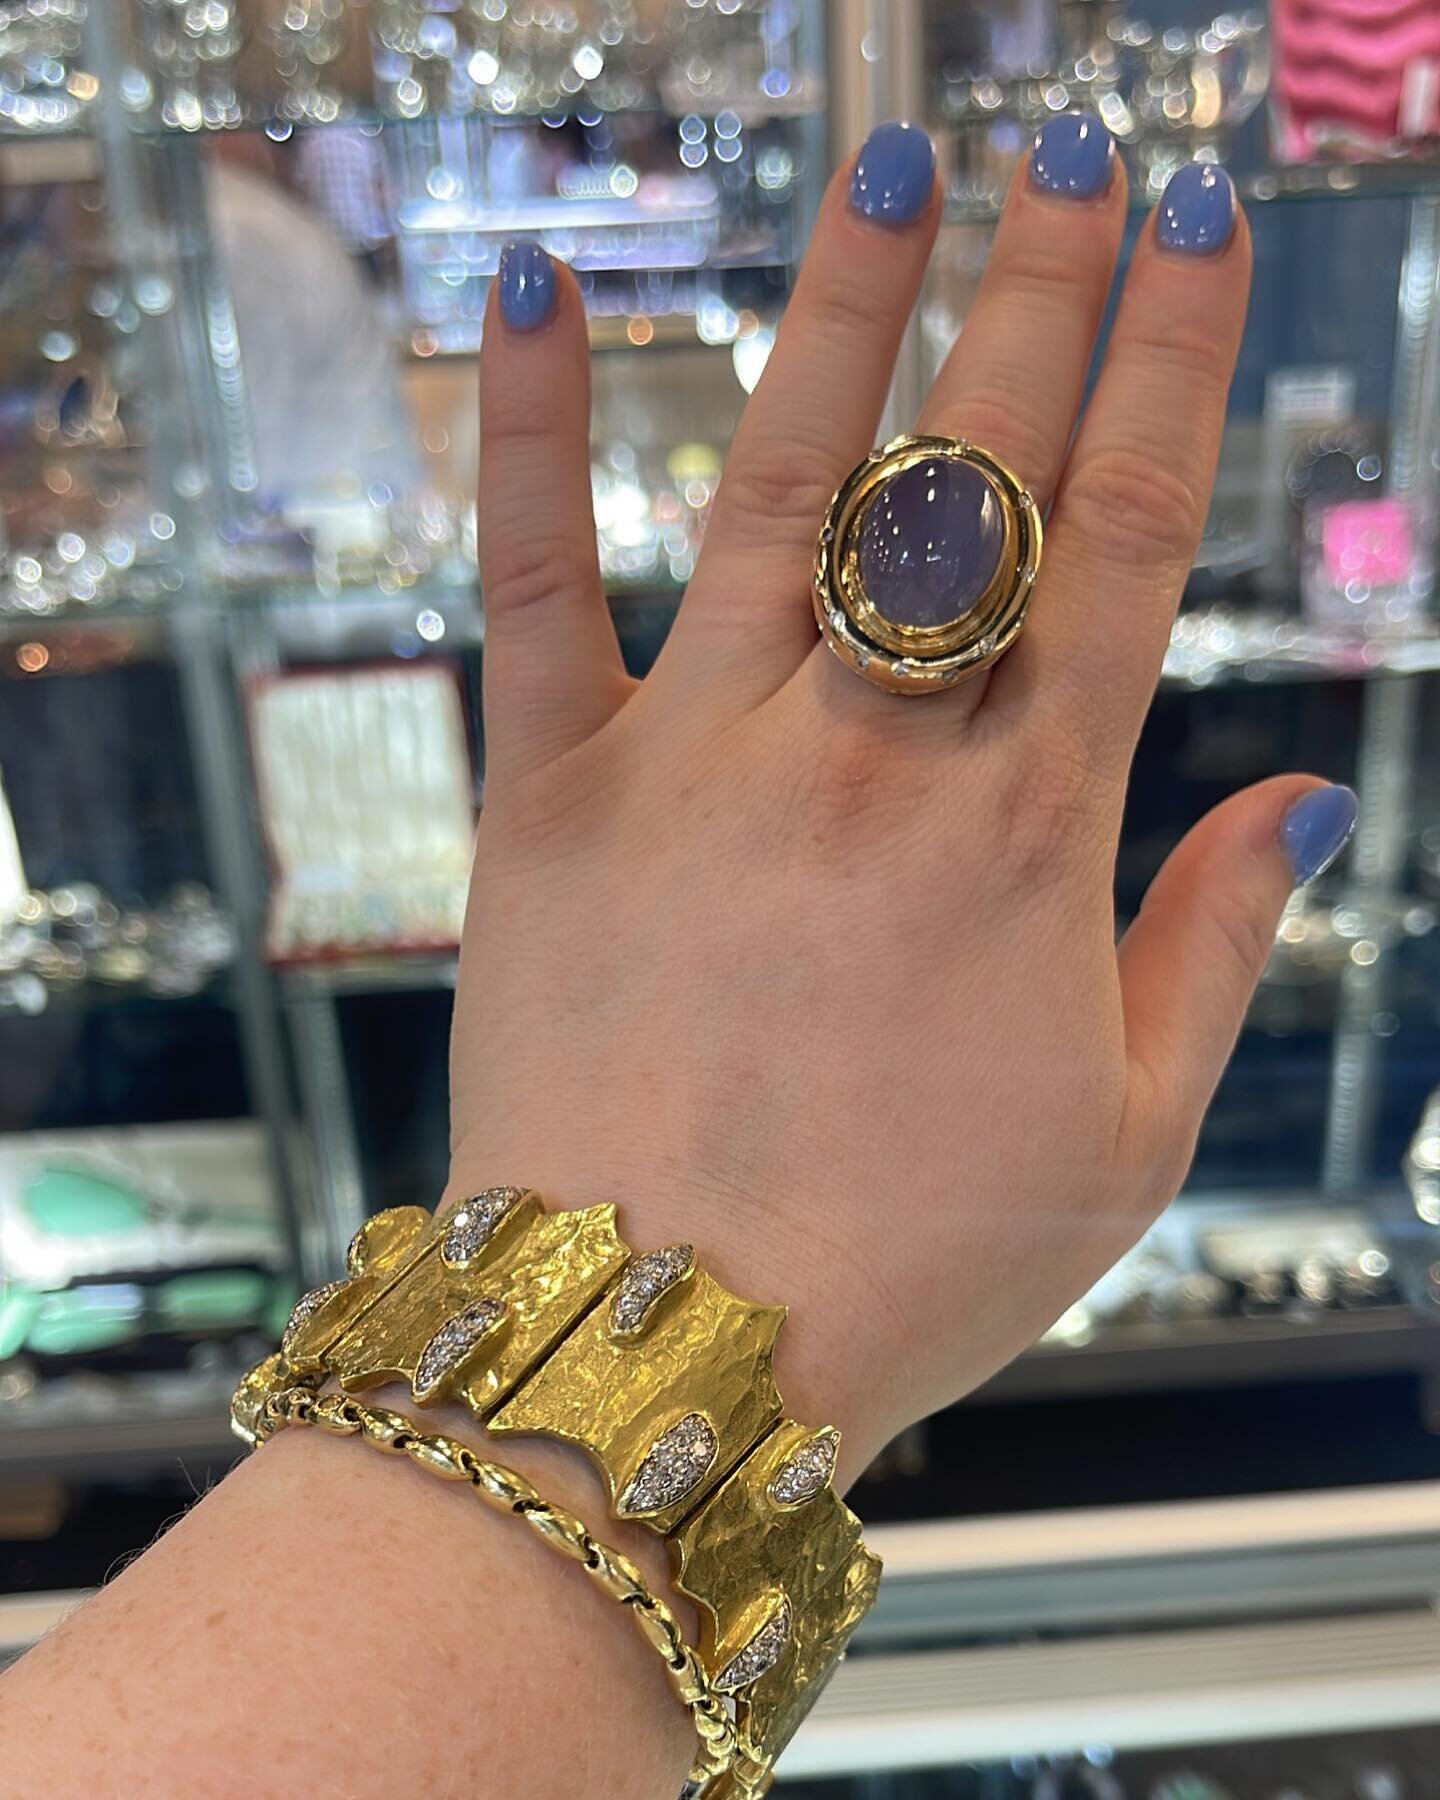 Incredible Chalcedony and diamond ring featured next to an Ed Weiner sculptural bracelet. Weiner described jewelry design to jazz improvisation, creating wonderful architectural jewelry. We love these two pieces together, how would you wear them? ✨💋